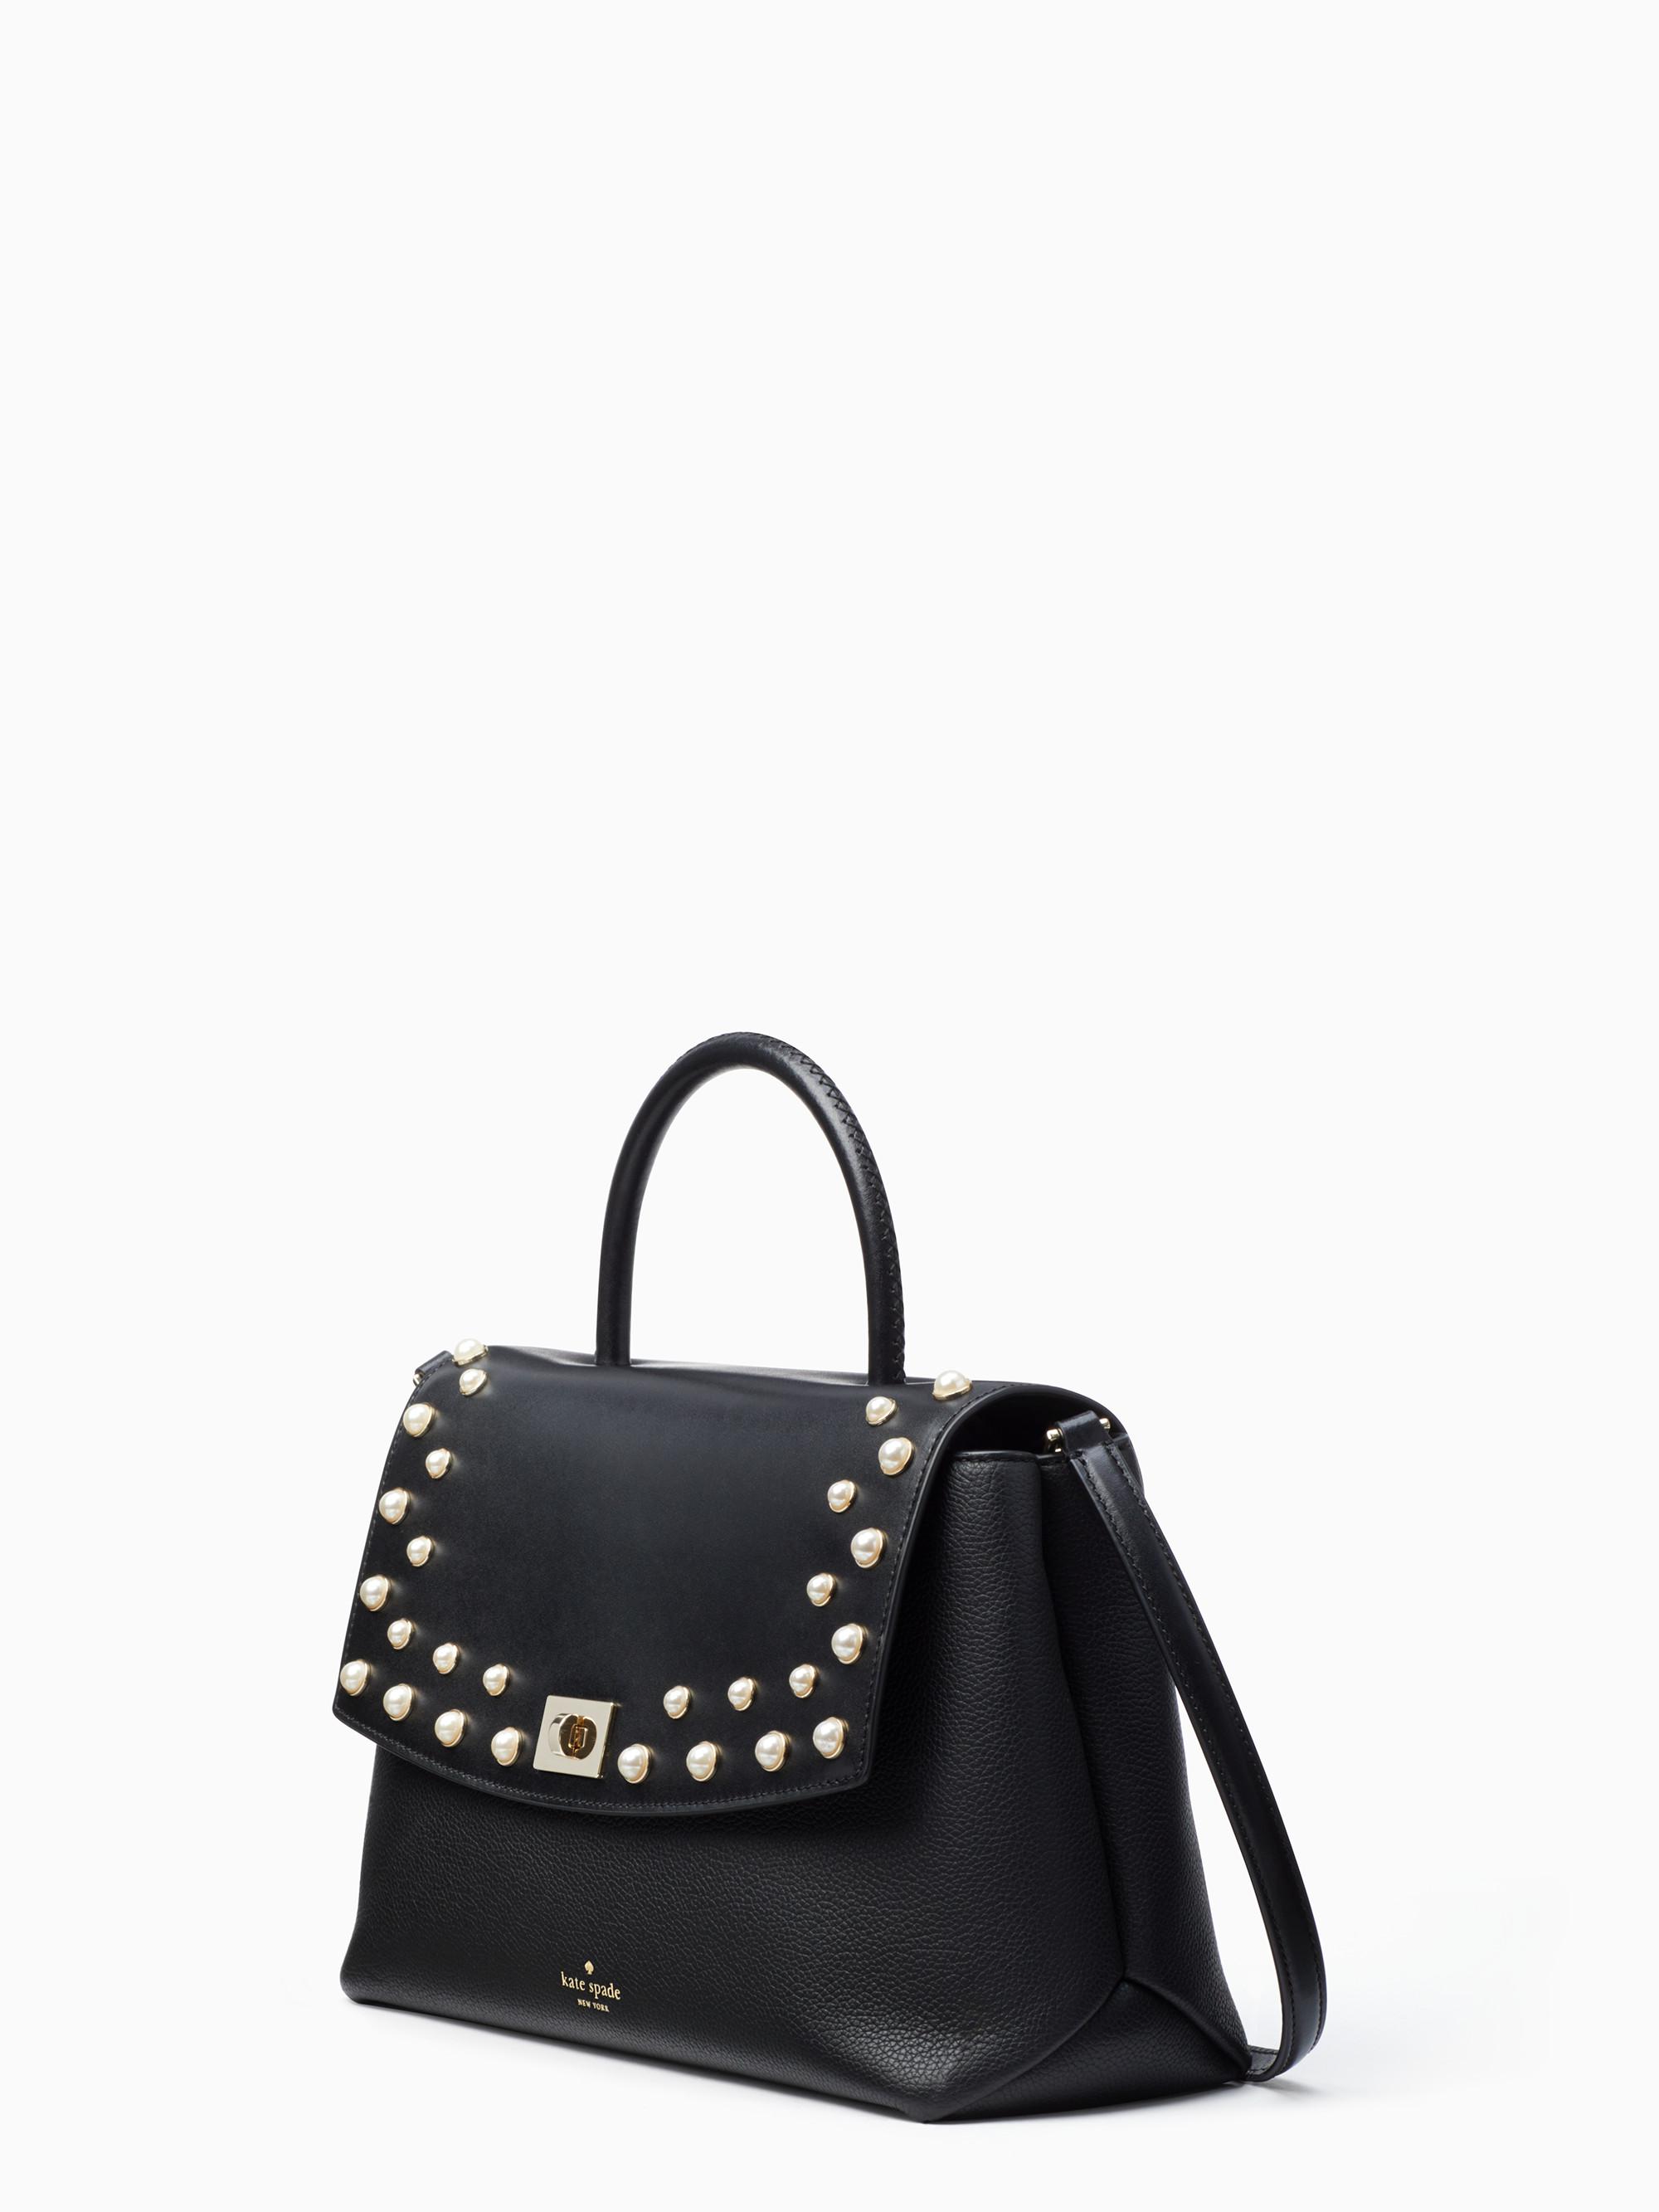 Kate Spade Black Purse With Pearls Top Sellers, SAVE 52% 